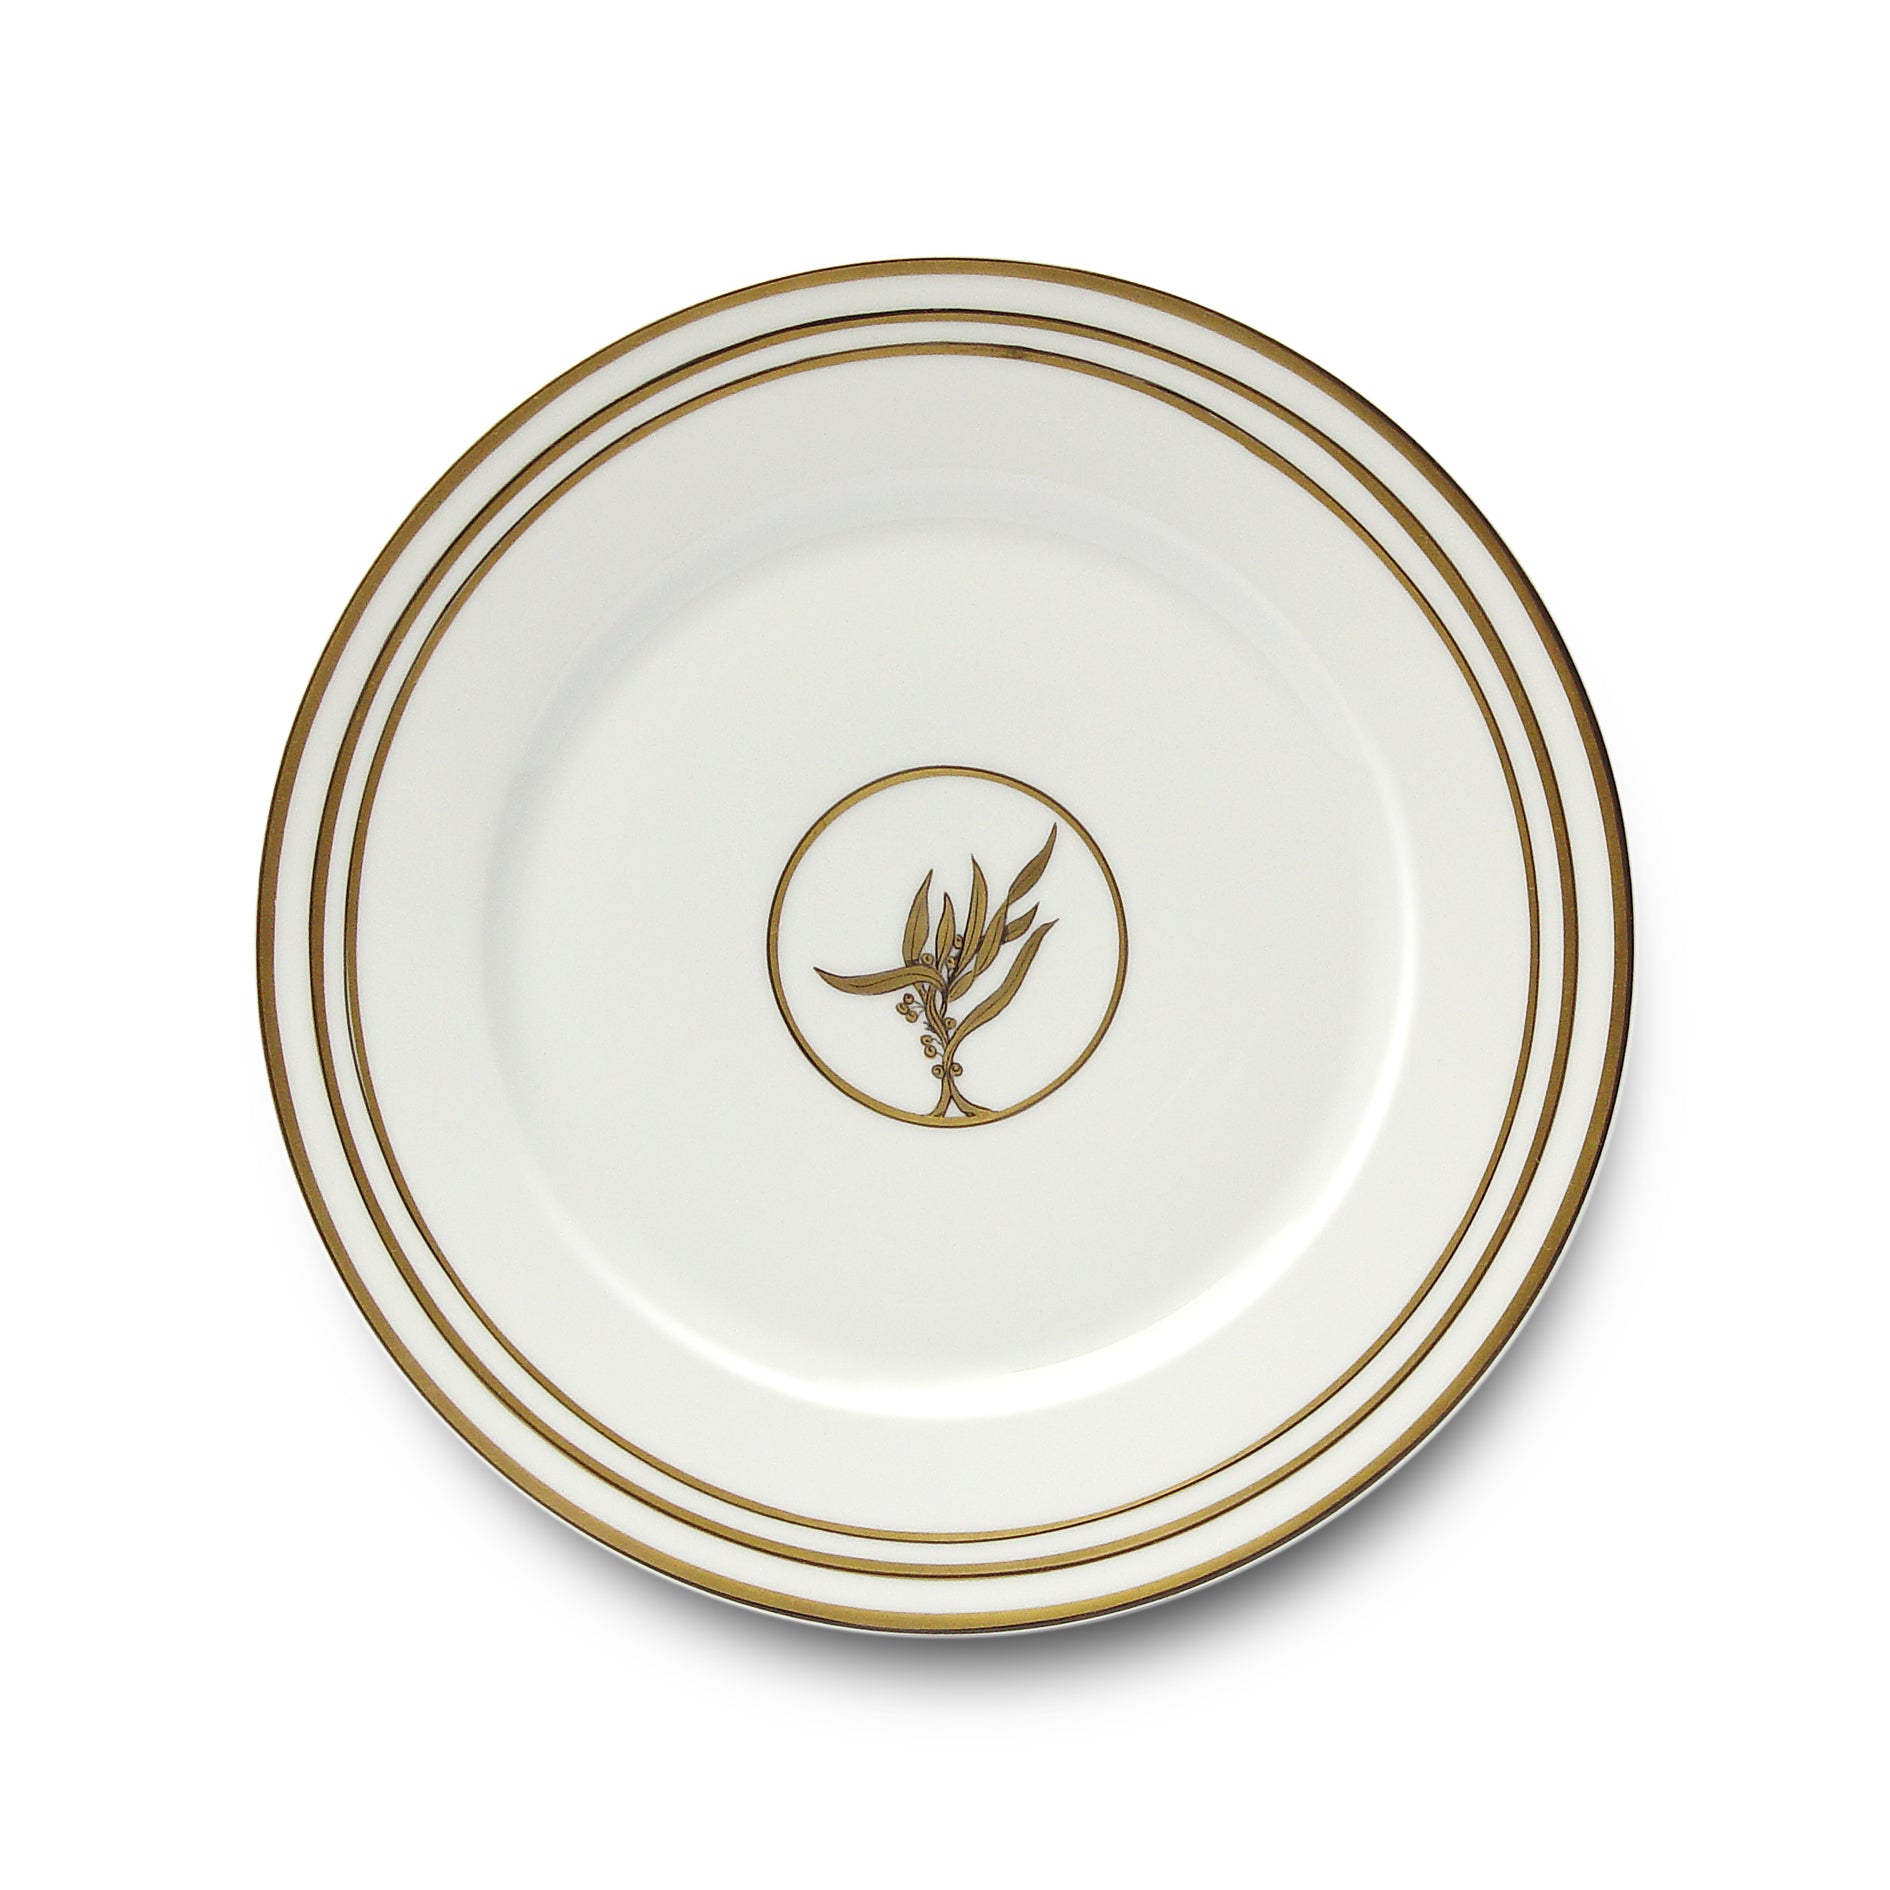 Or des Airs - Or des Mers - Assiette plate 04